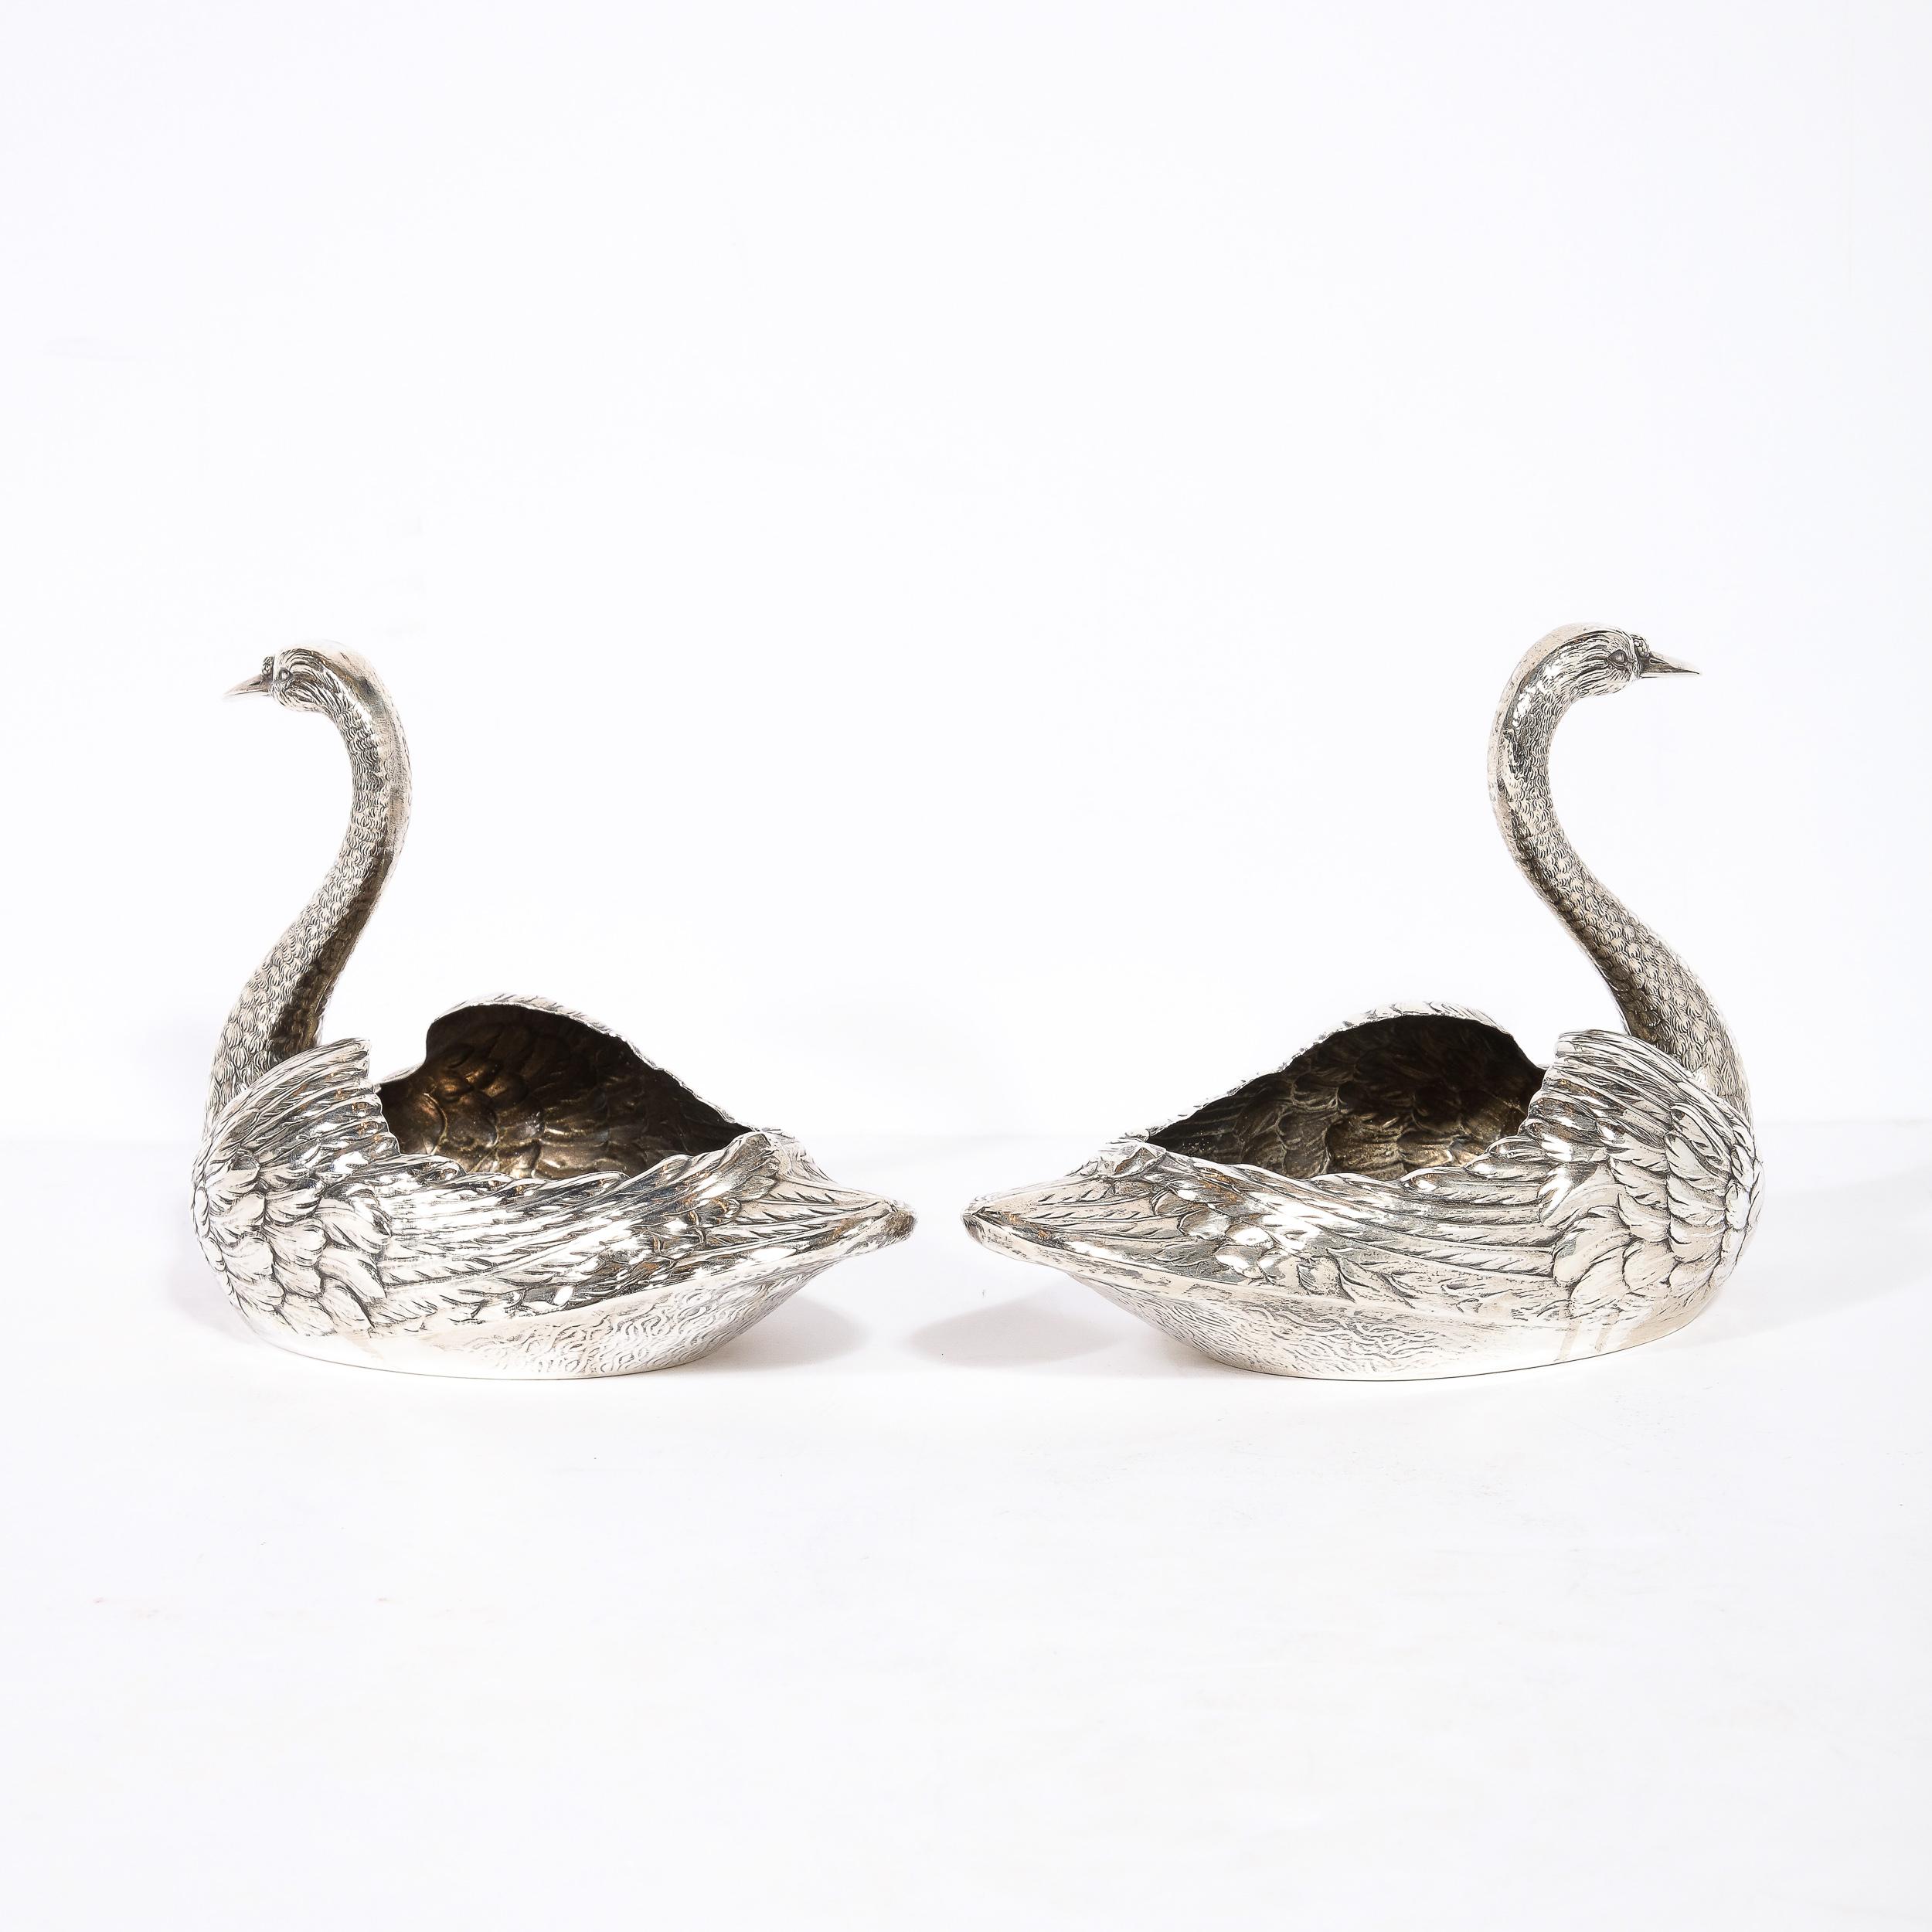 Pair of Sterling Silver Swan Decorative Bowls Signed Gorham Sterling For Sale 1